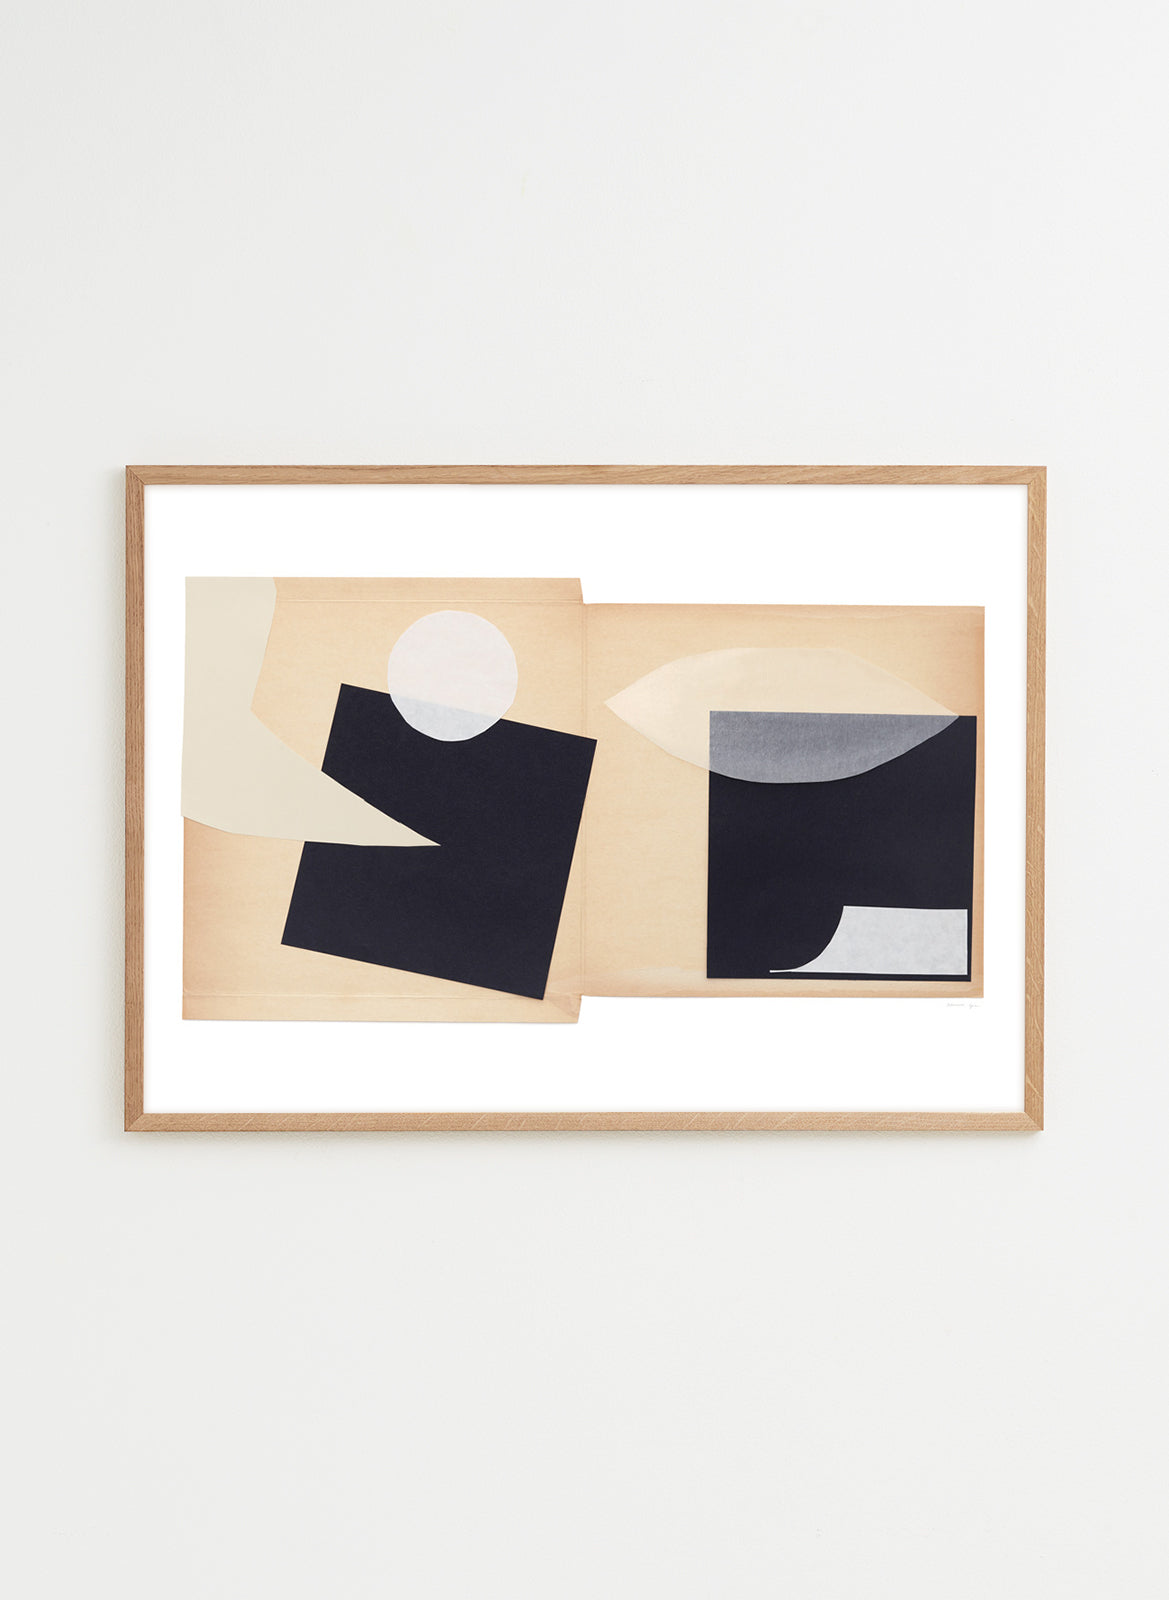 Black, white and brown poster made by atelier cph